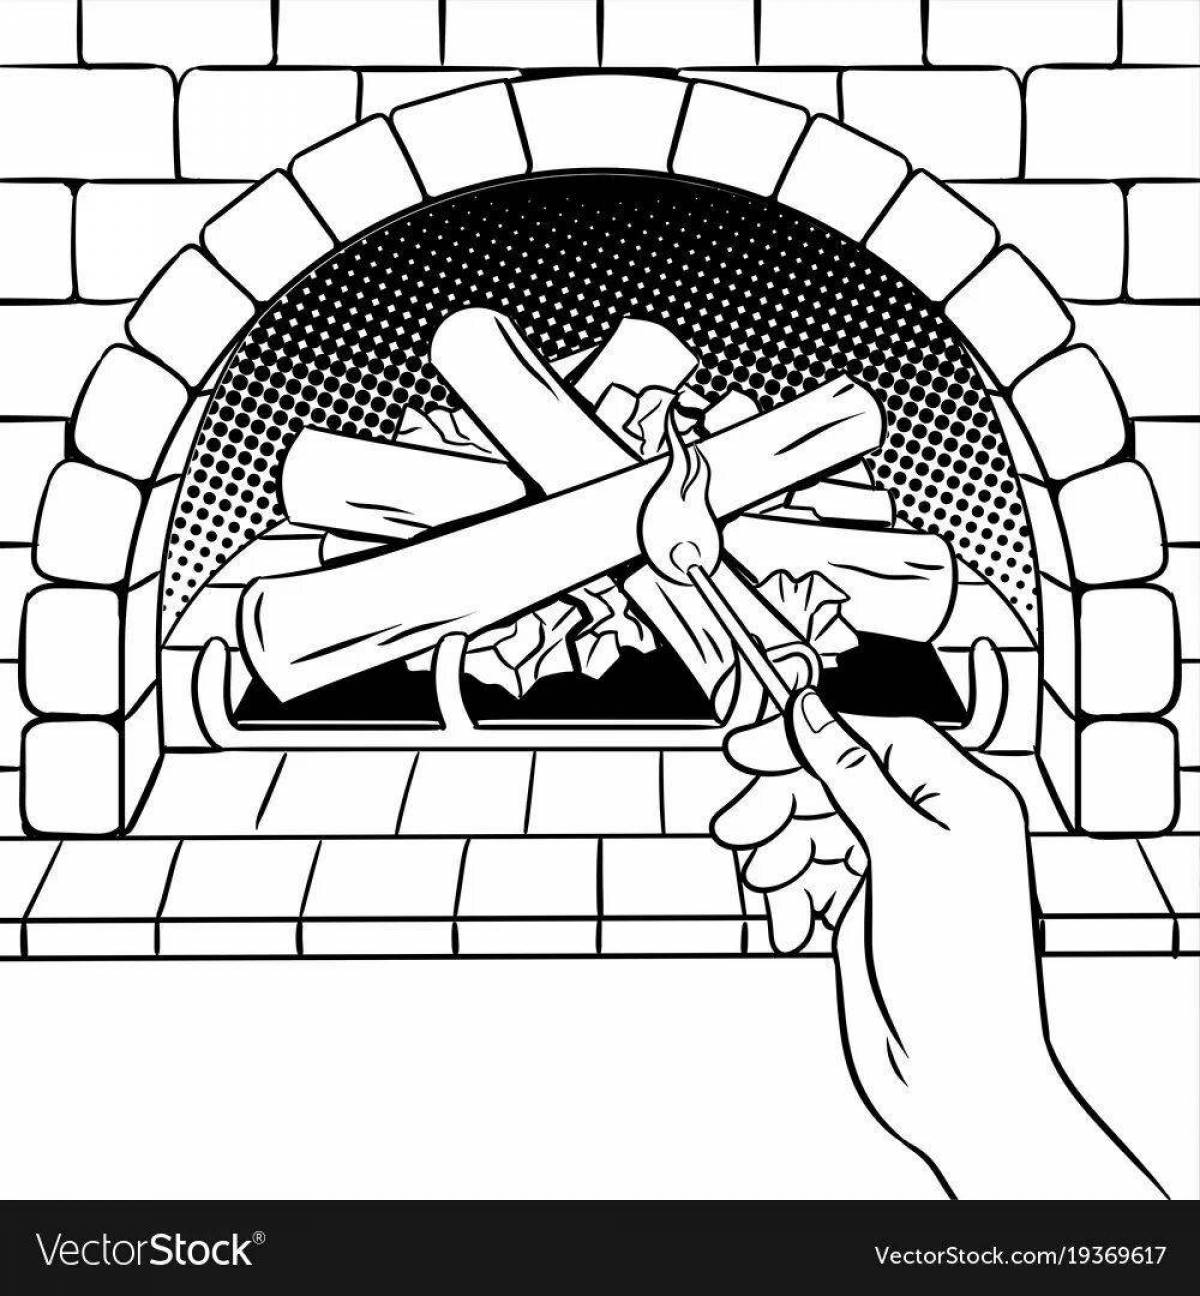 Fun coloring oven for kids